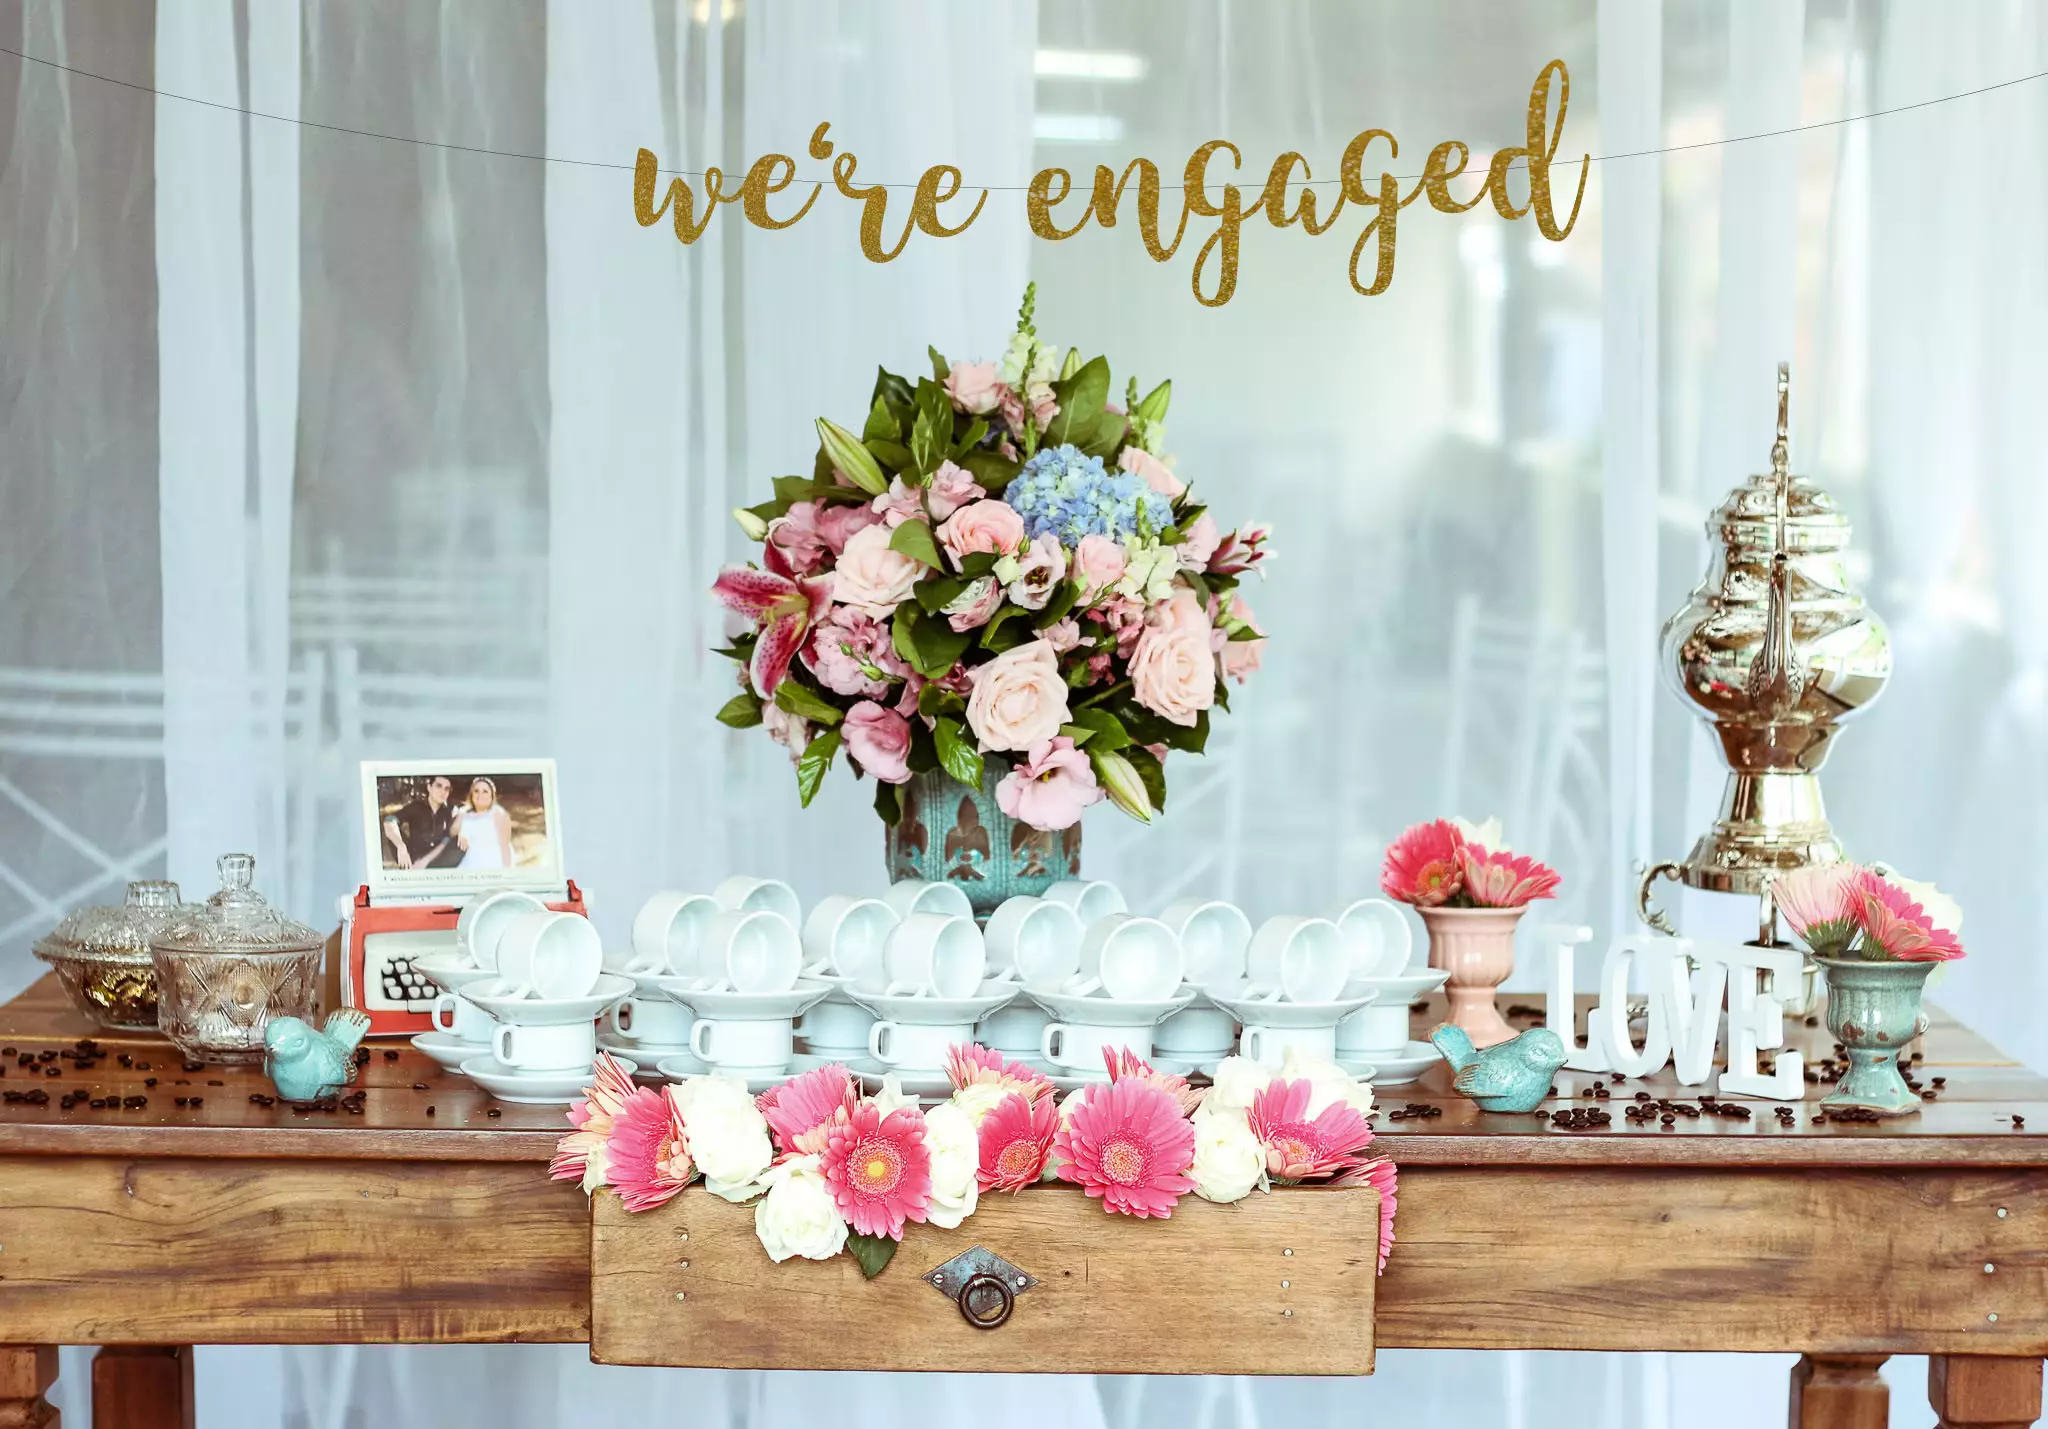 Top 15 Party Items for Engagement